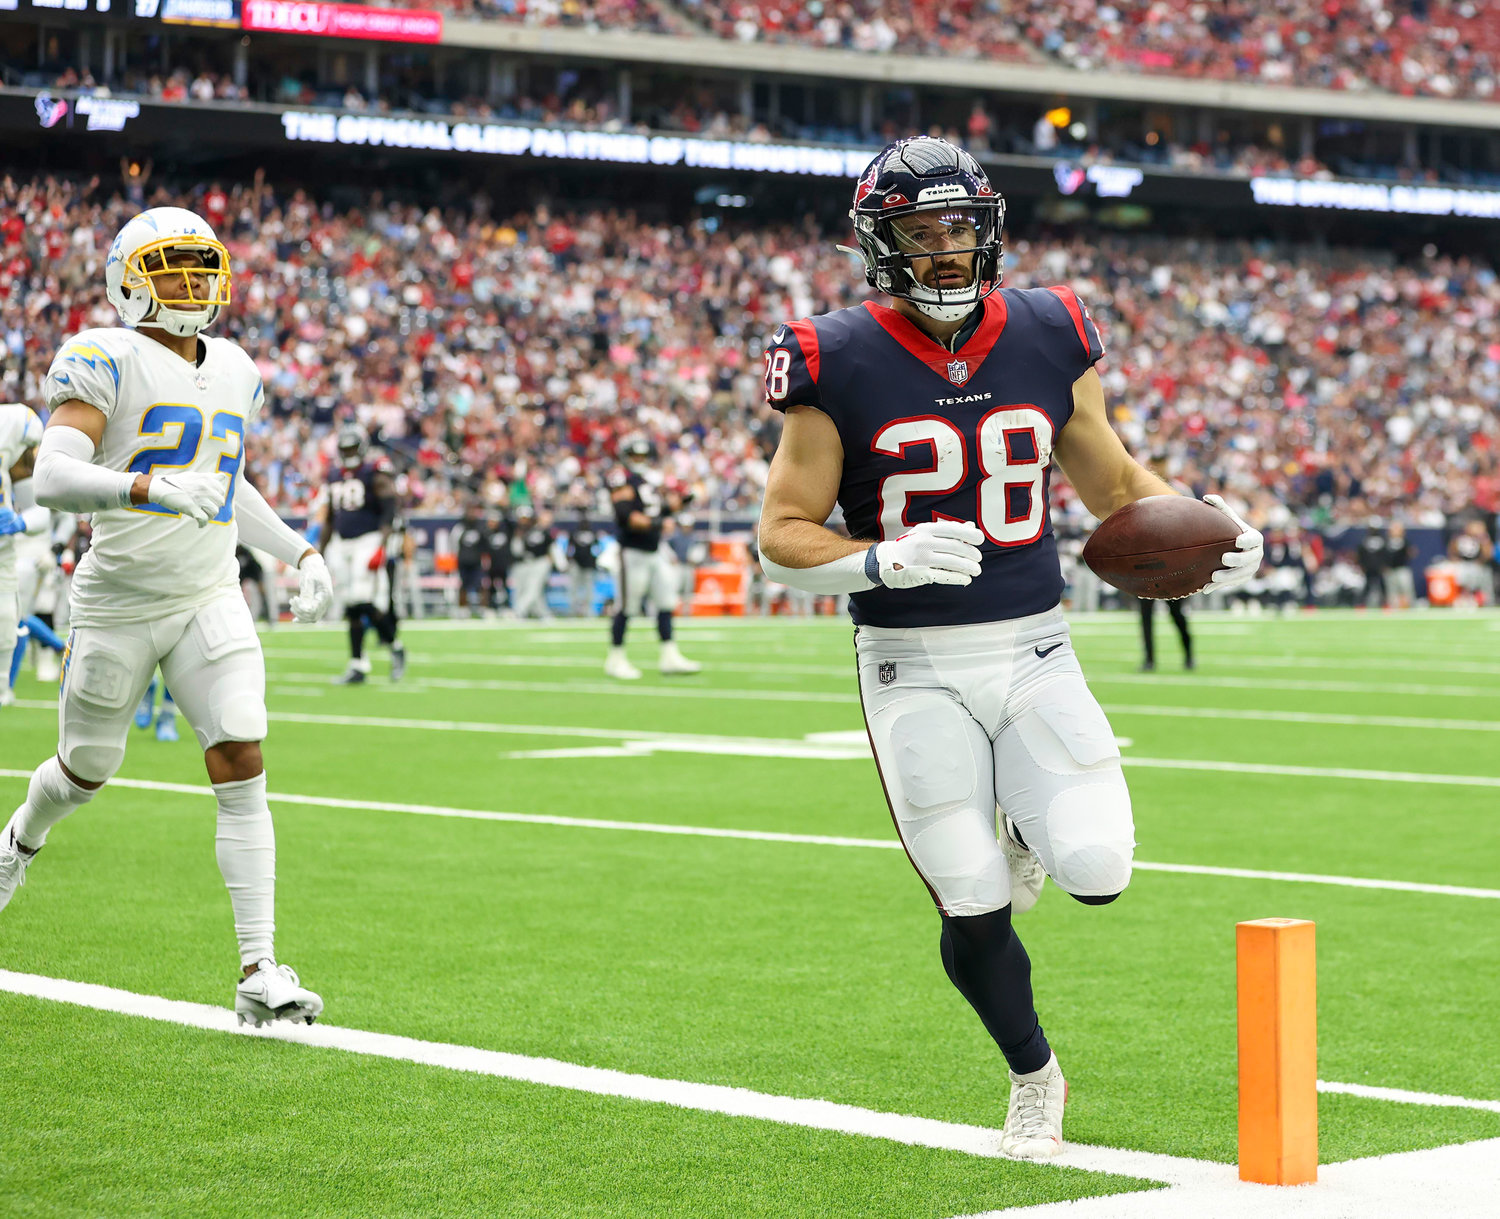 Texans running back Rex Burkhead (28) scores on an 8-yard touchdown catch during an NFL game between the Texans and the Chargers on Oct. 2, 2022 in Houston. The Chargers won 34-24.